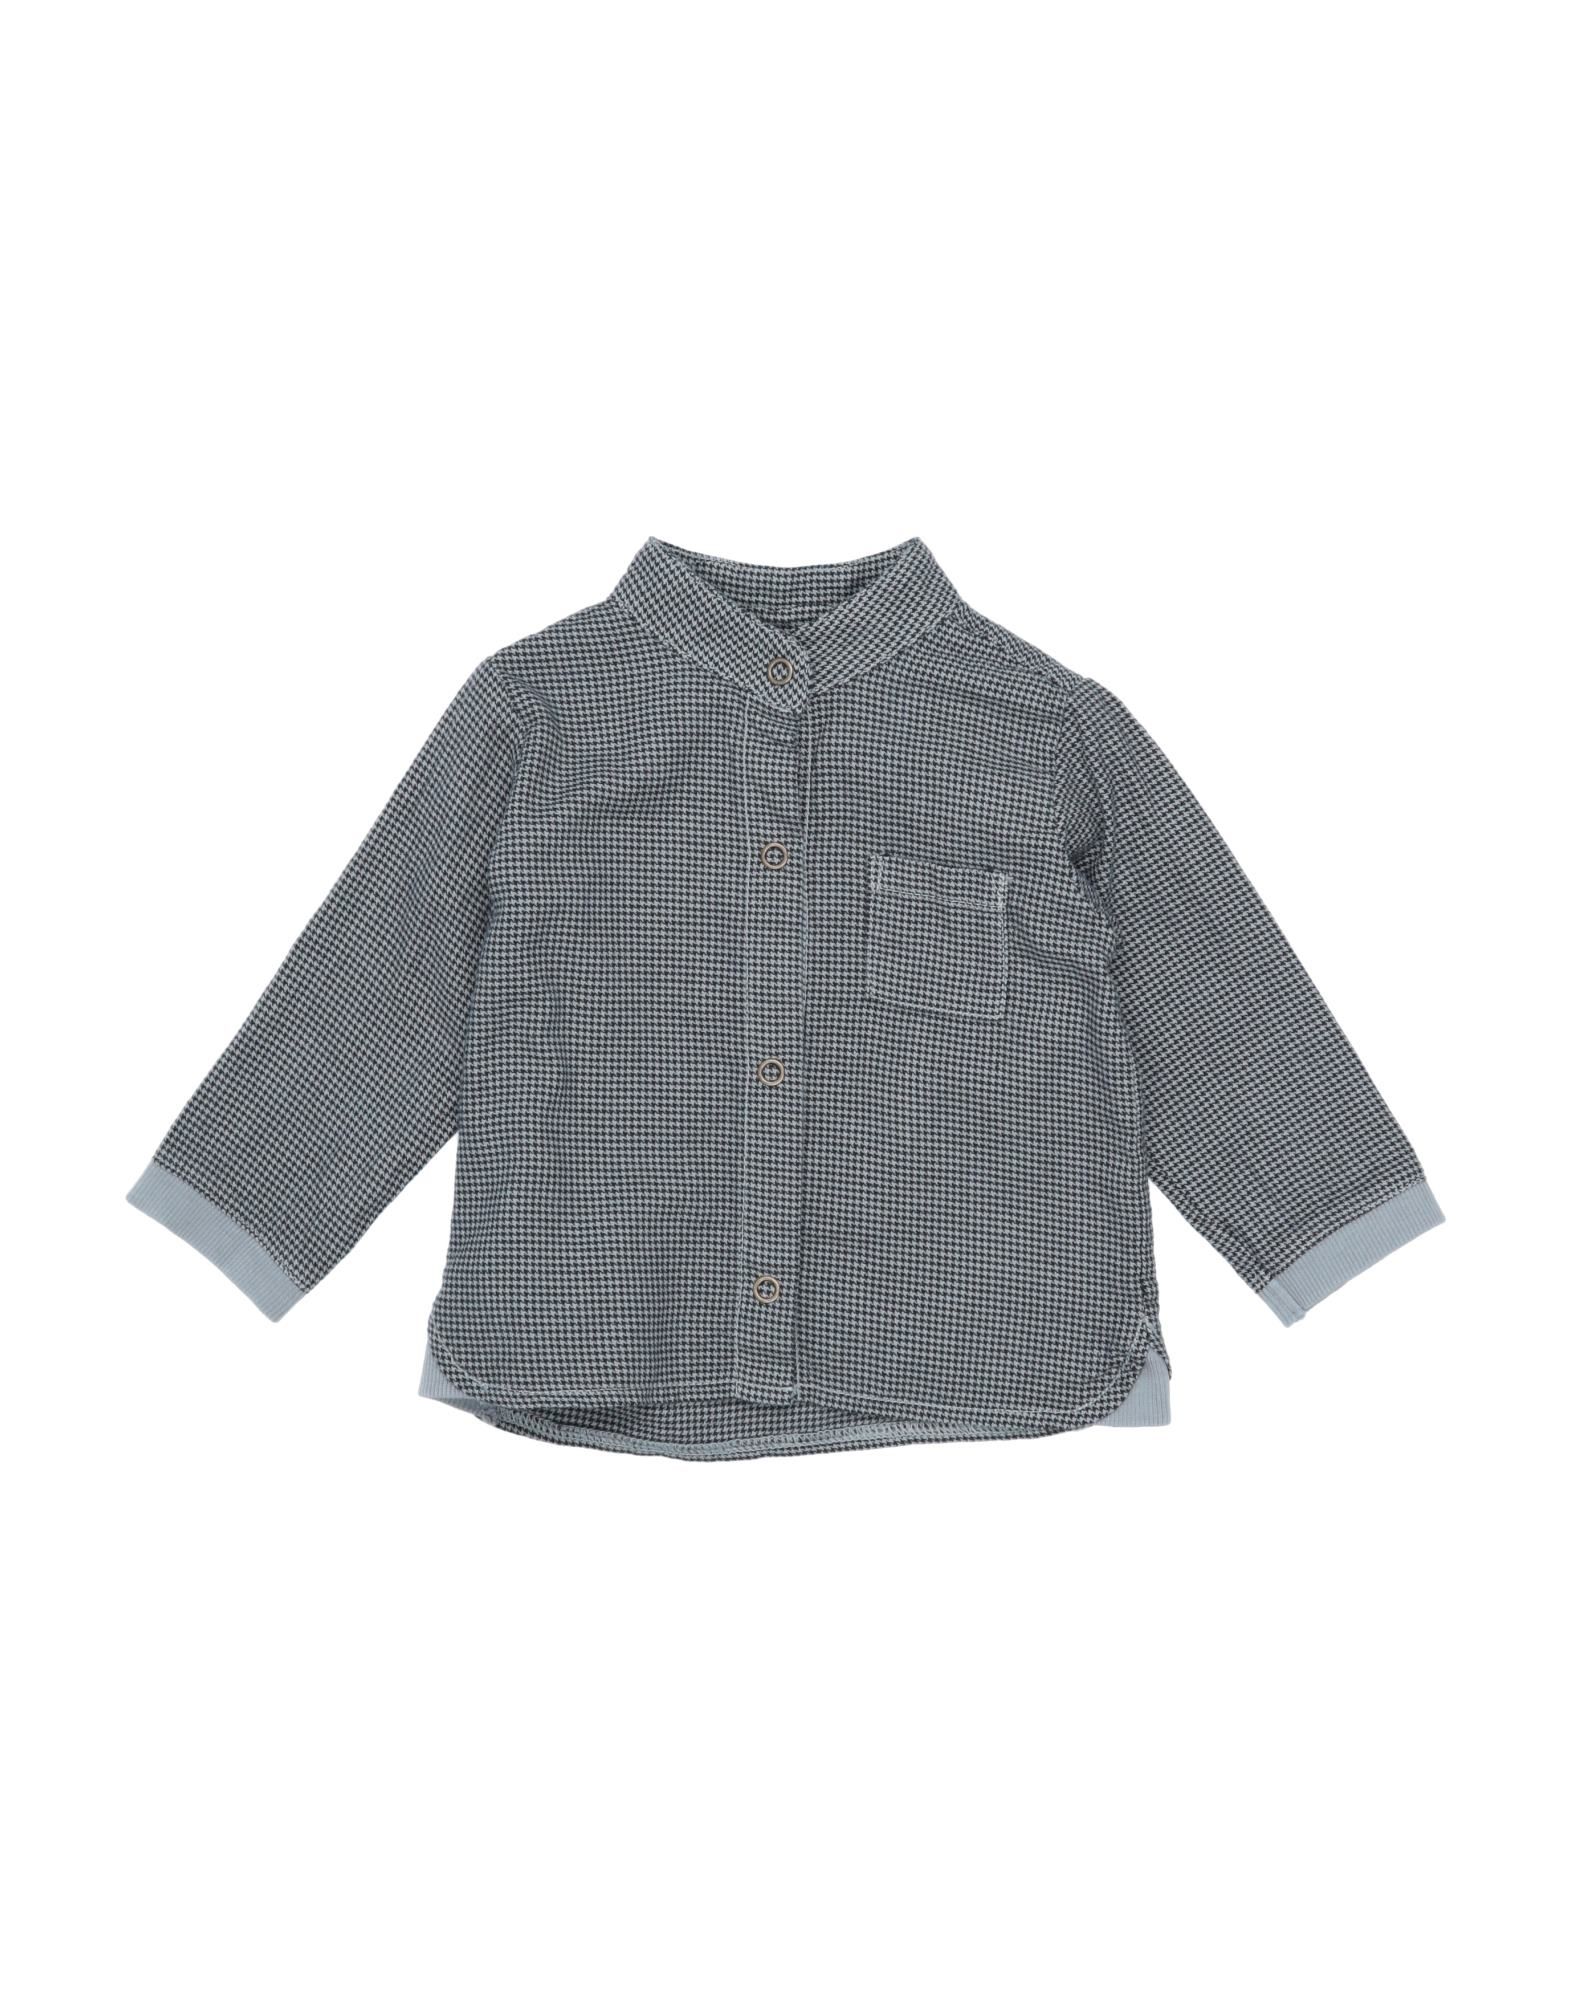 1+ IN THE FAMILY 1 + IN THE FAMILY NEWBORN GIRL SHIRT GREY SIZE 3 COTTON, ELASTANE,38929157IJ 3